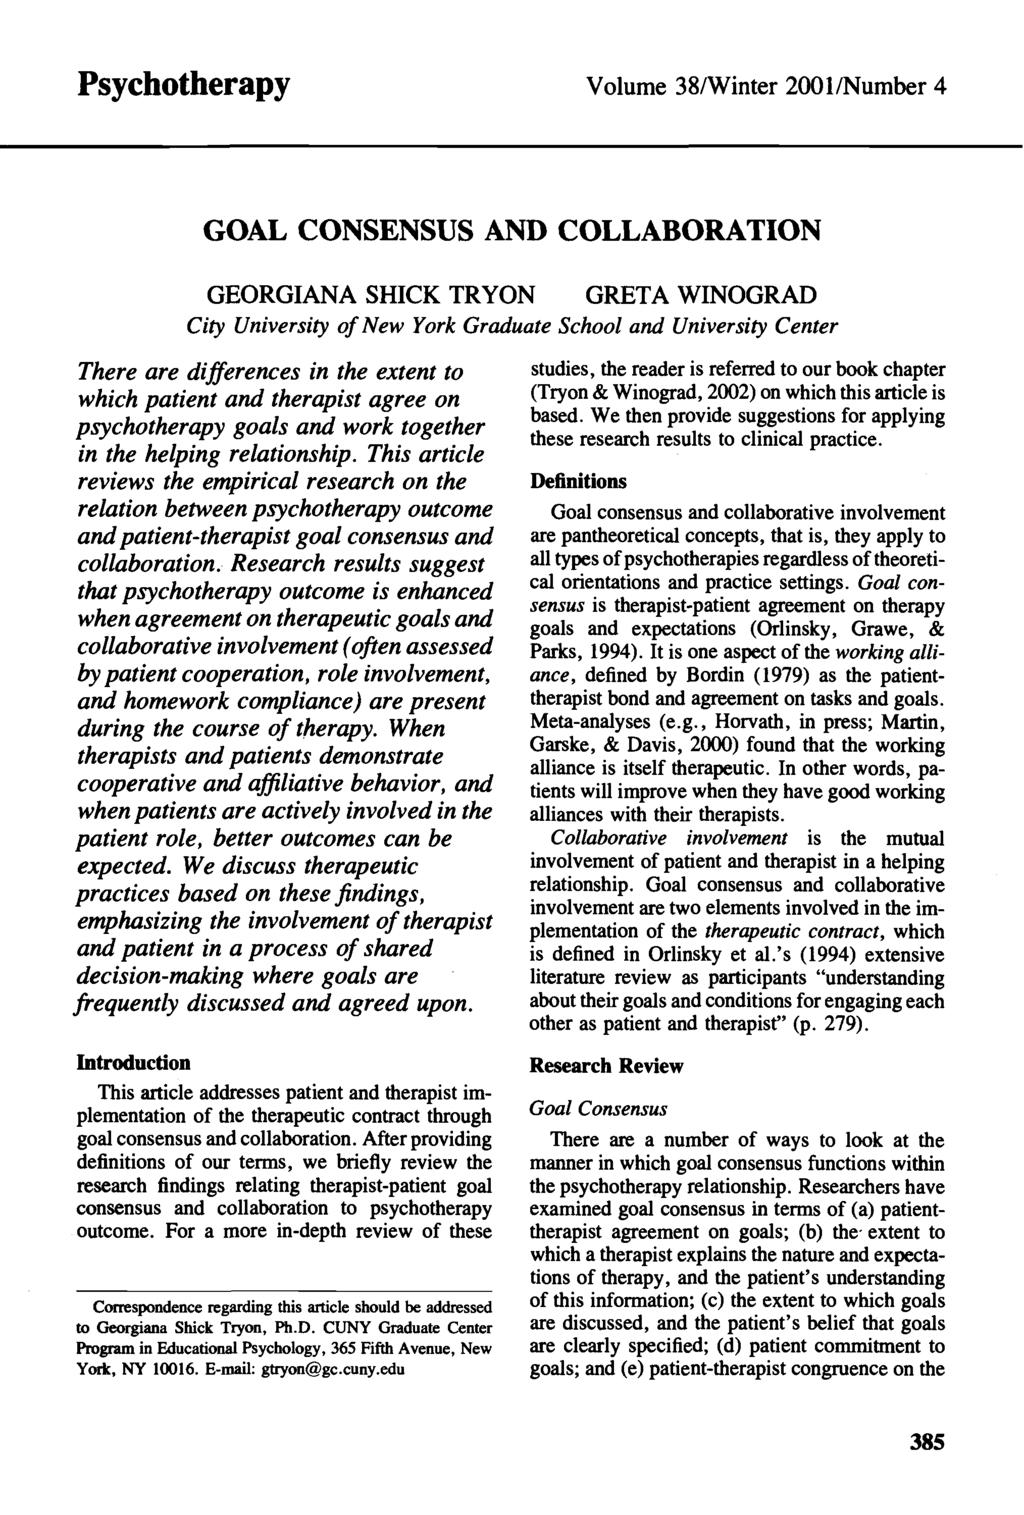 Psychotherapy Volume 38/Winter 2001/Number 4 GOAL CONSENSUS AND COLLABORATION GEORGIANA SHICK TRYON GRETA WINOGRAD City University of New York Graduate School and University Center There are